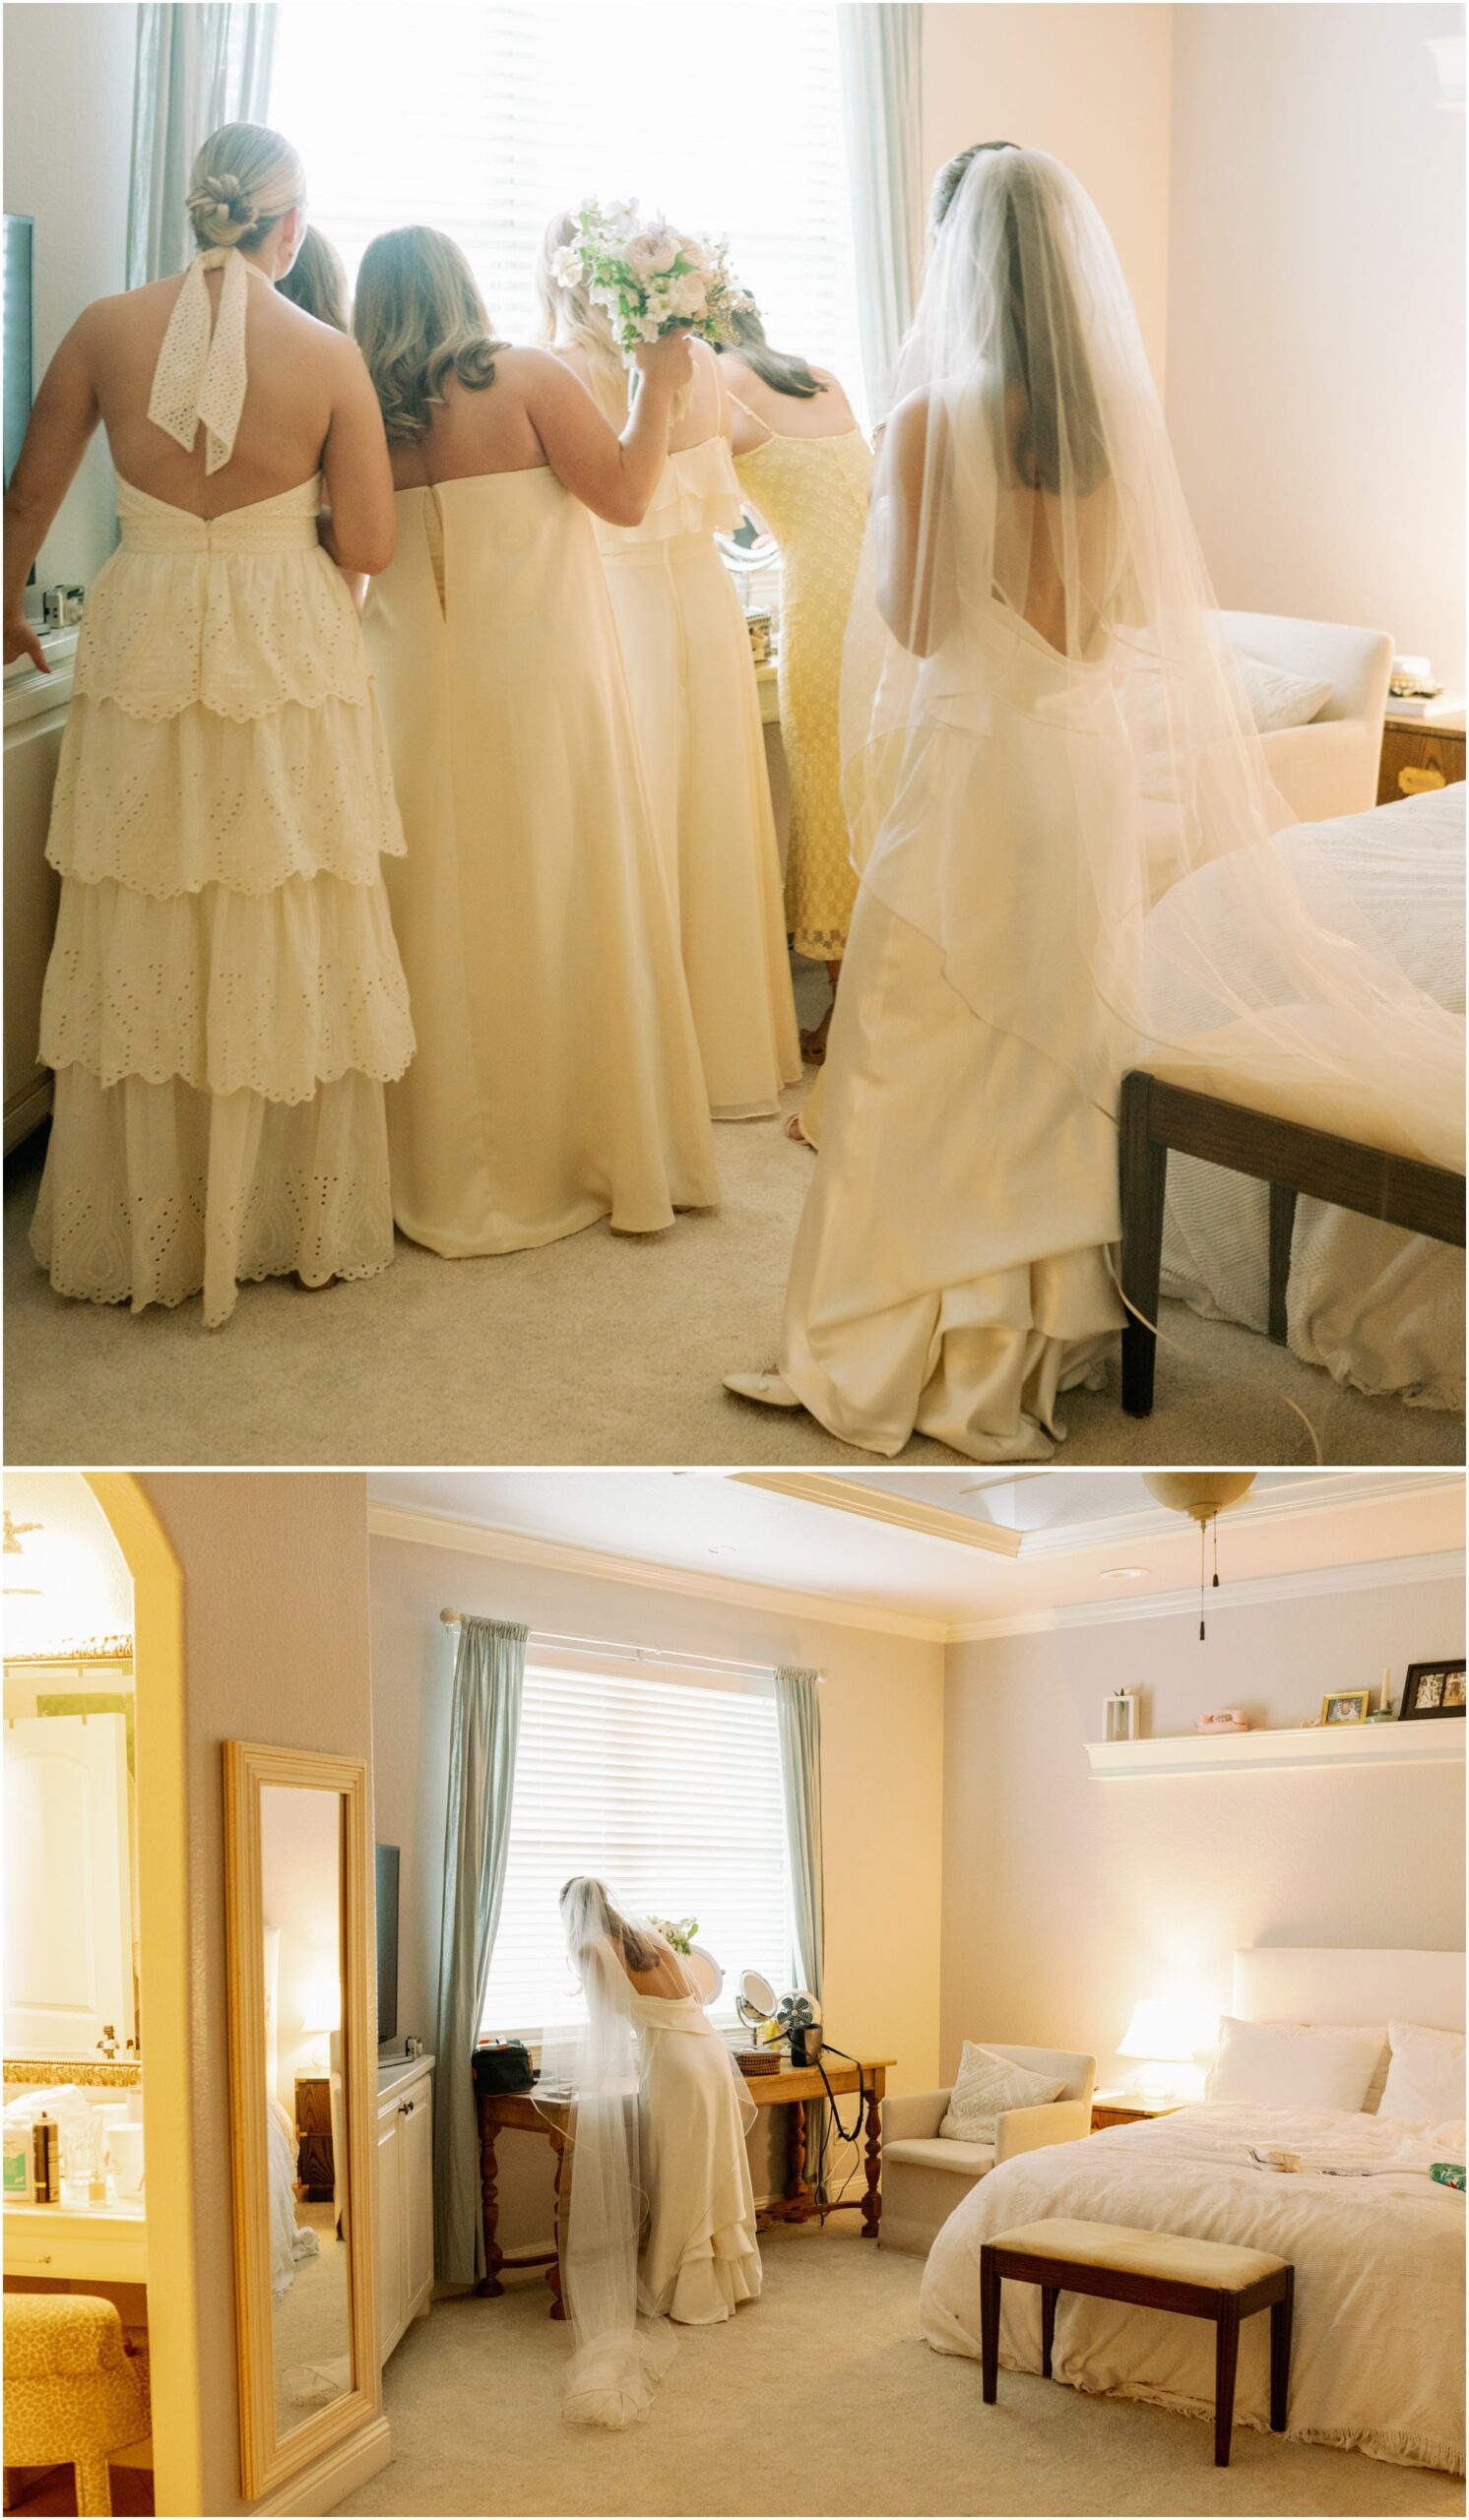 bride and bridesmaids in childhood bedroom on wedding day in yellow dresses from an elevated backyard wedding in fort worth, Texas